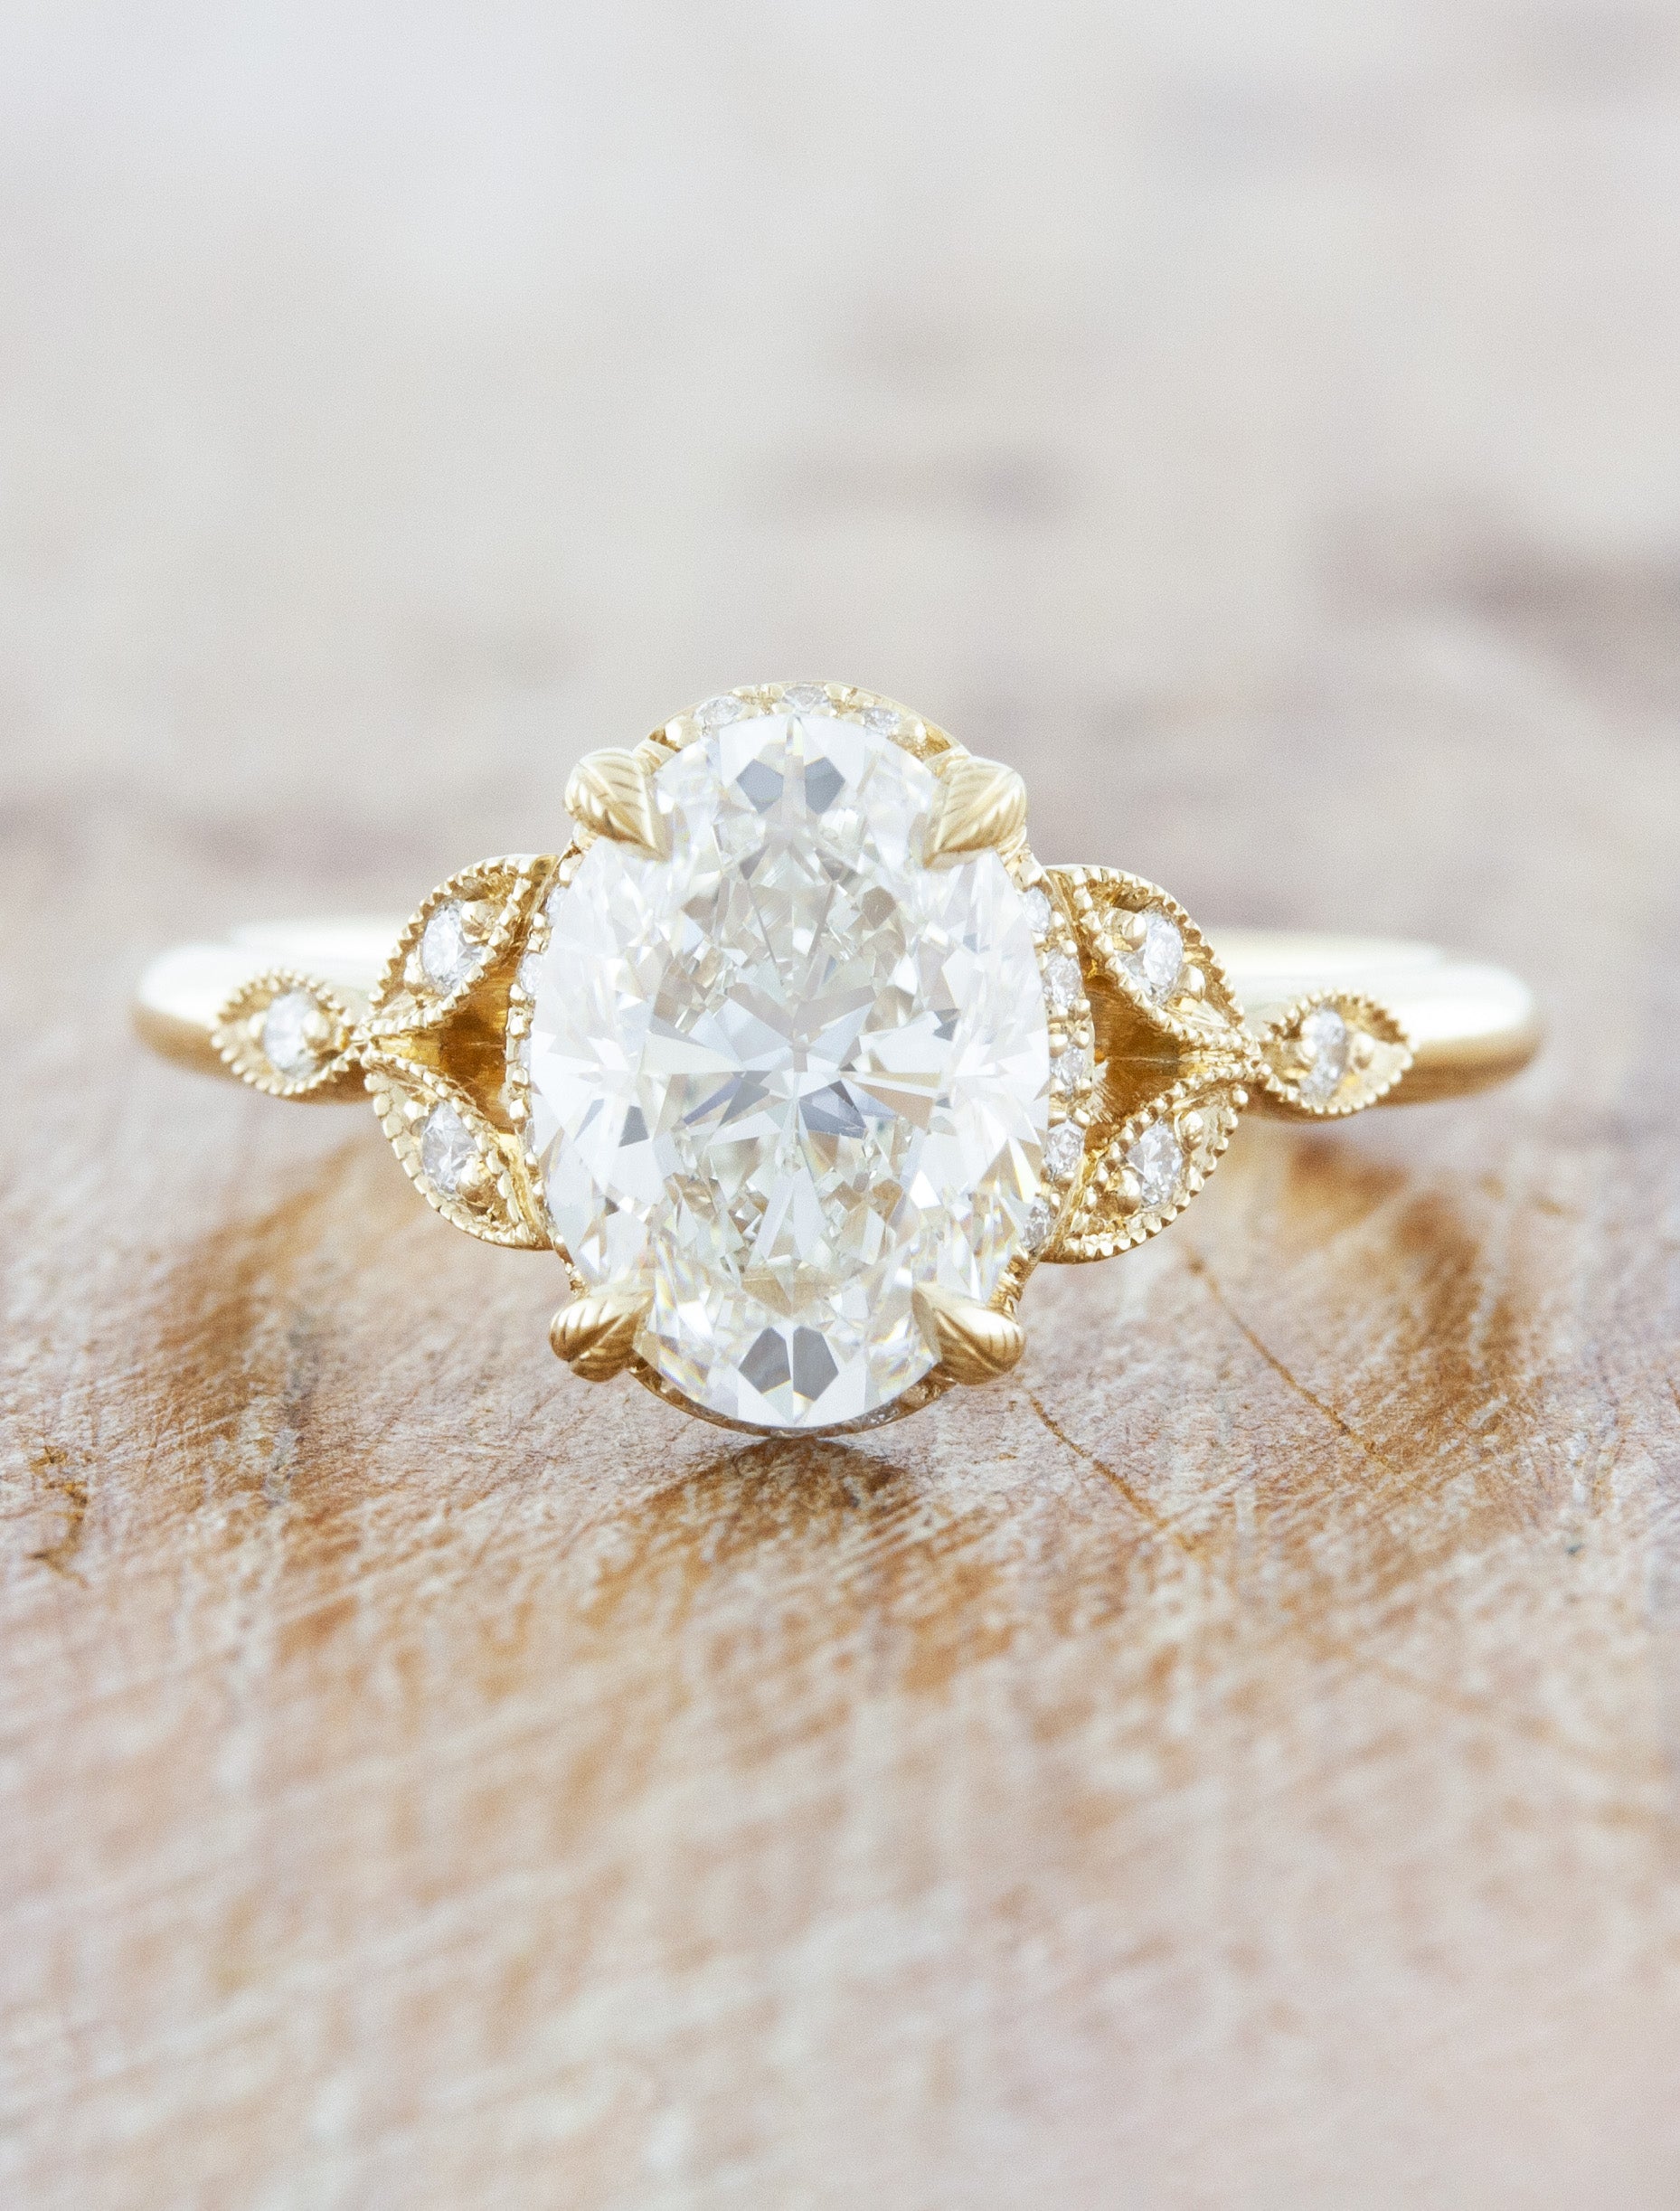 Oval Diamond Engagement Ring Set with Vintage-Inspired Bands | Ken & Dana